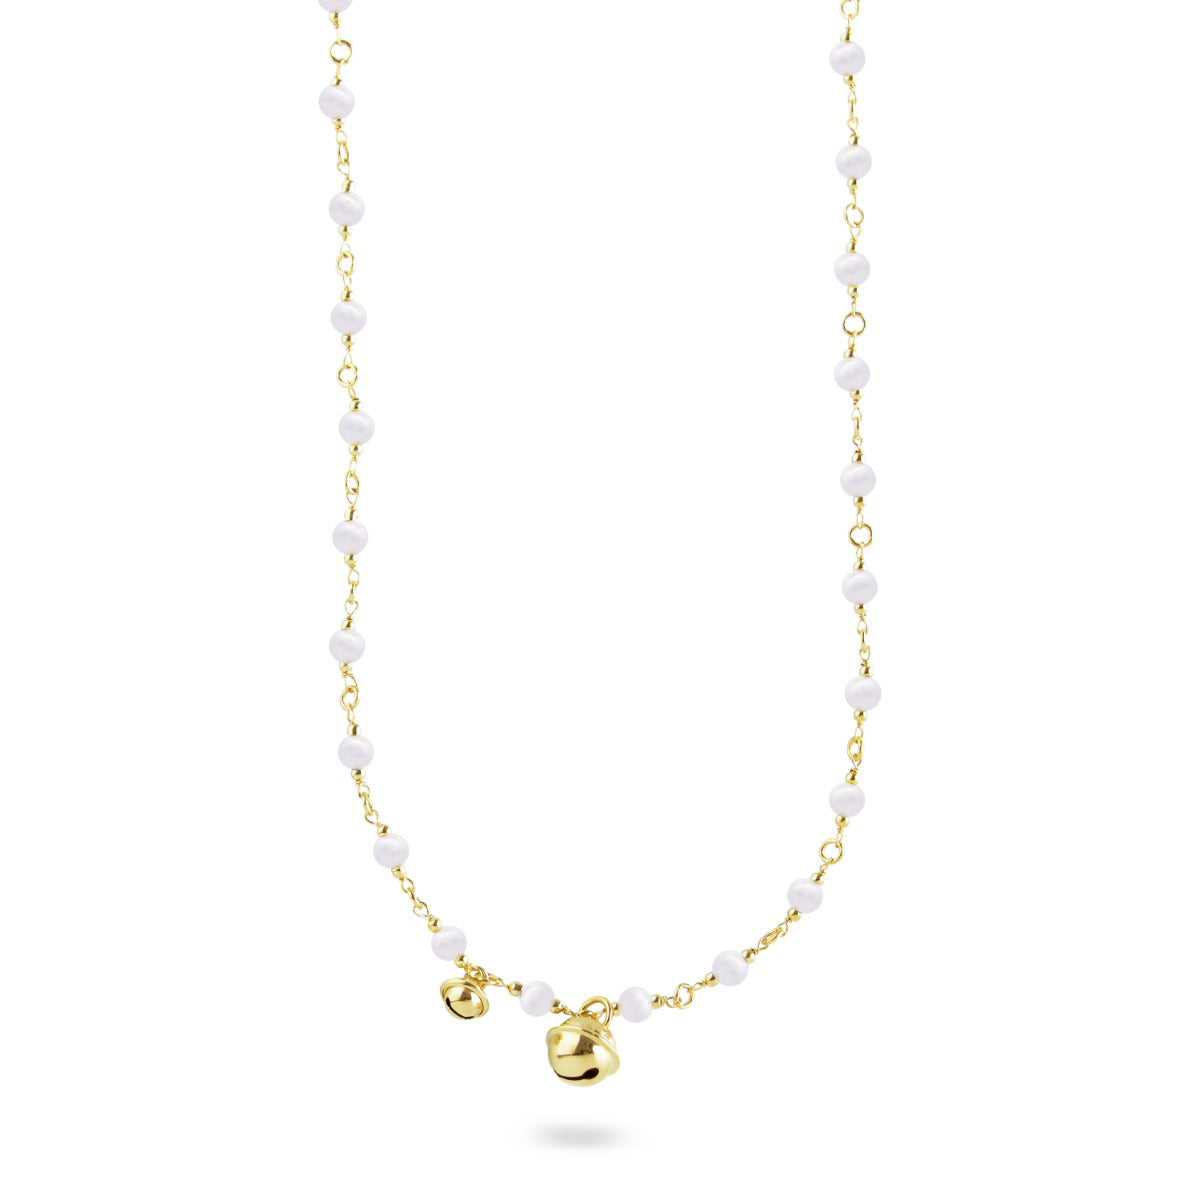 Long necklace with pearls and double bell - WHITESIDE